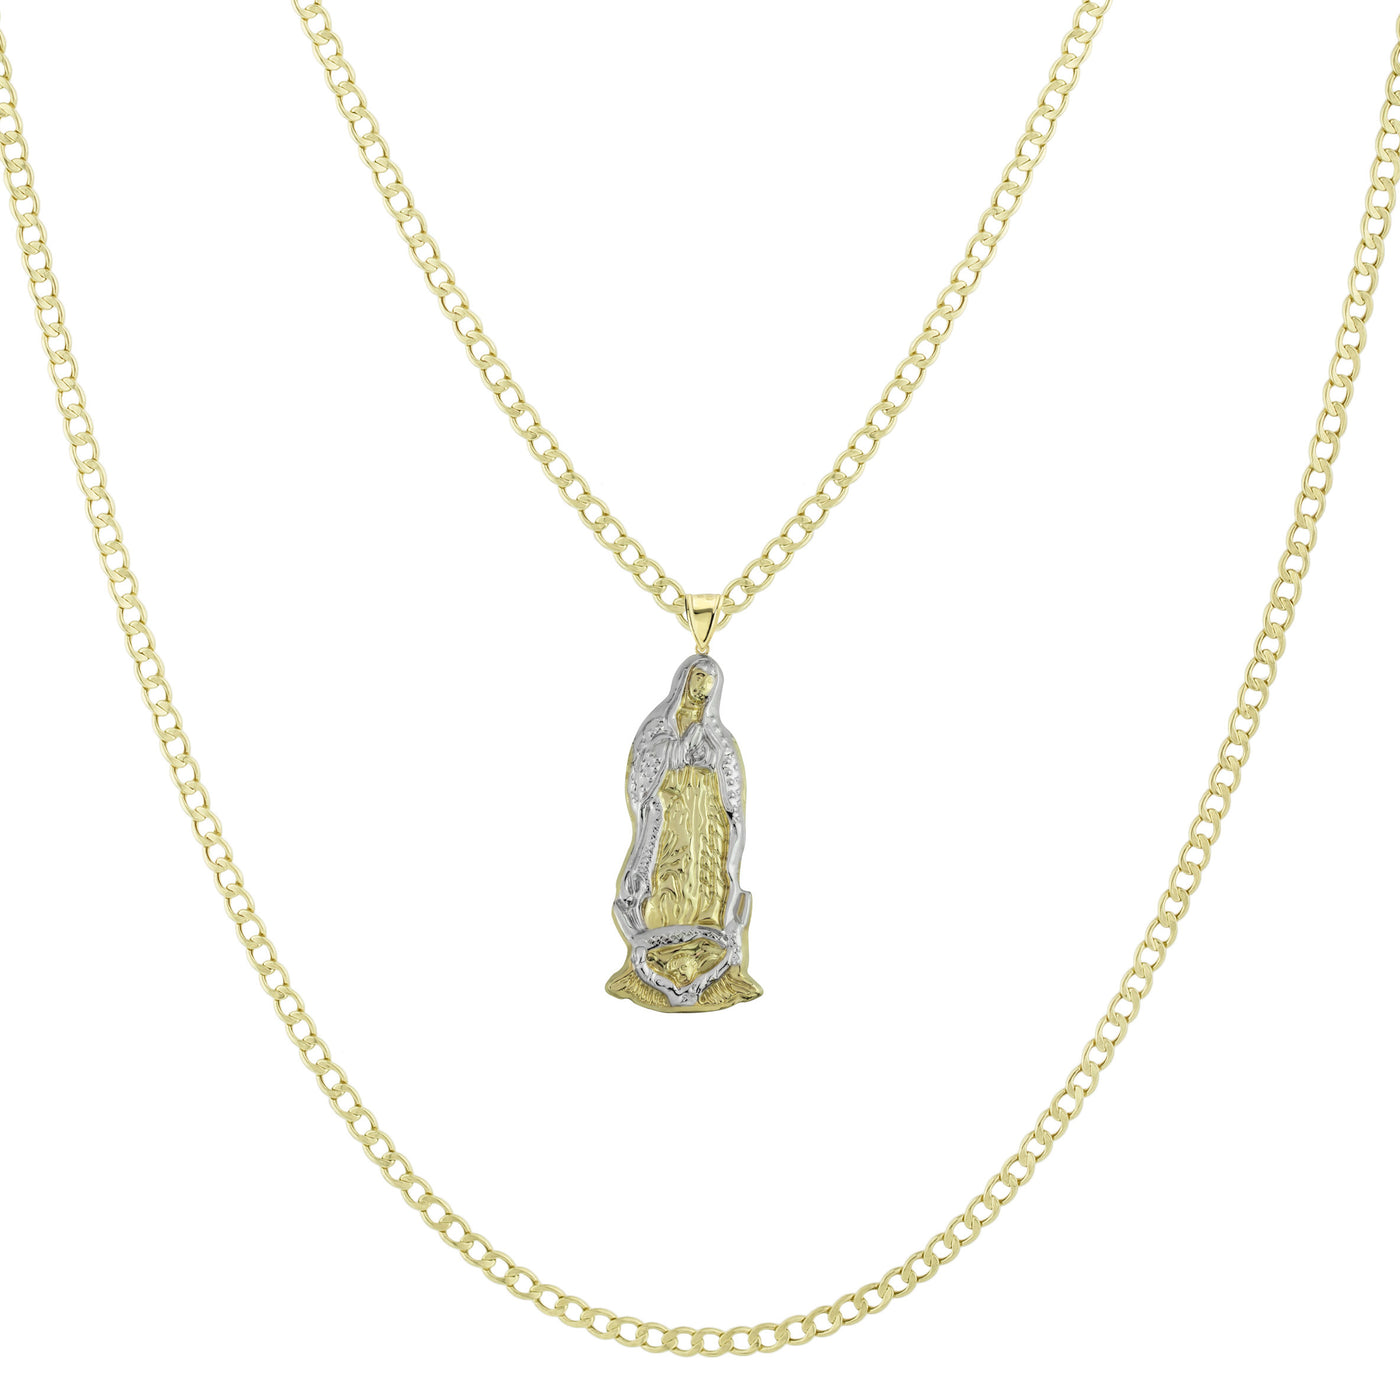 1 3/8" Lady Guadalupe Virgin Mary Pendant & Chain Necklace Set 14K Yellow White Gold